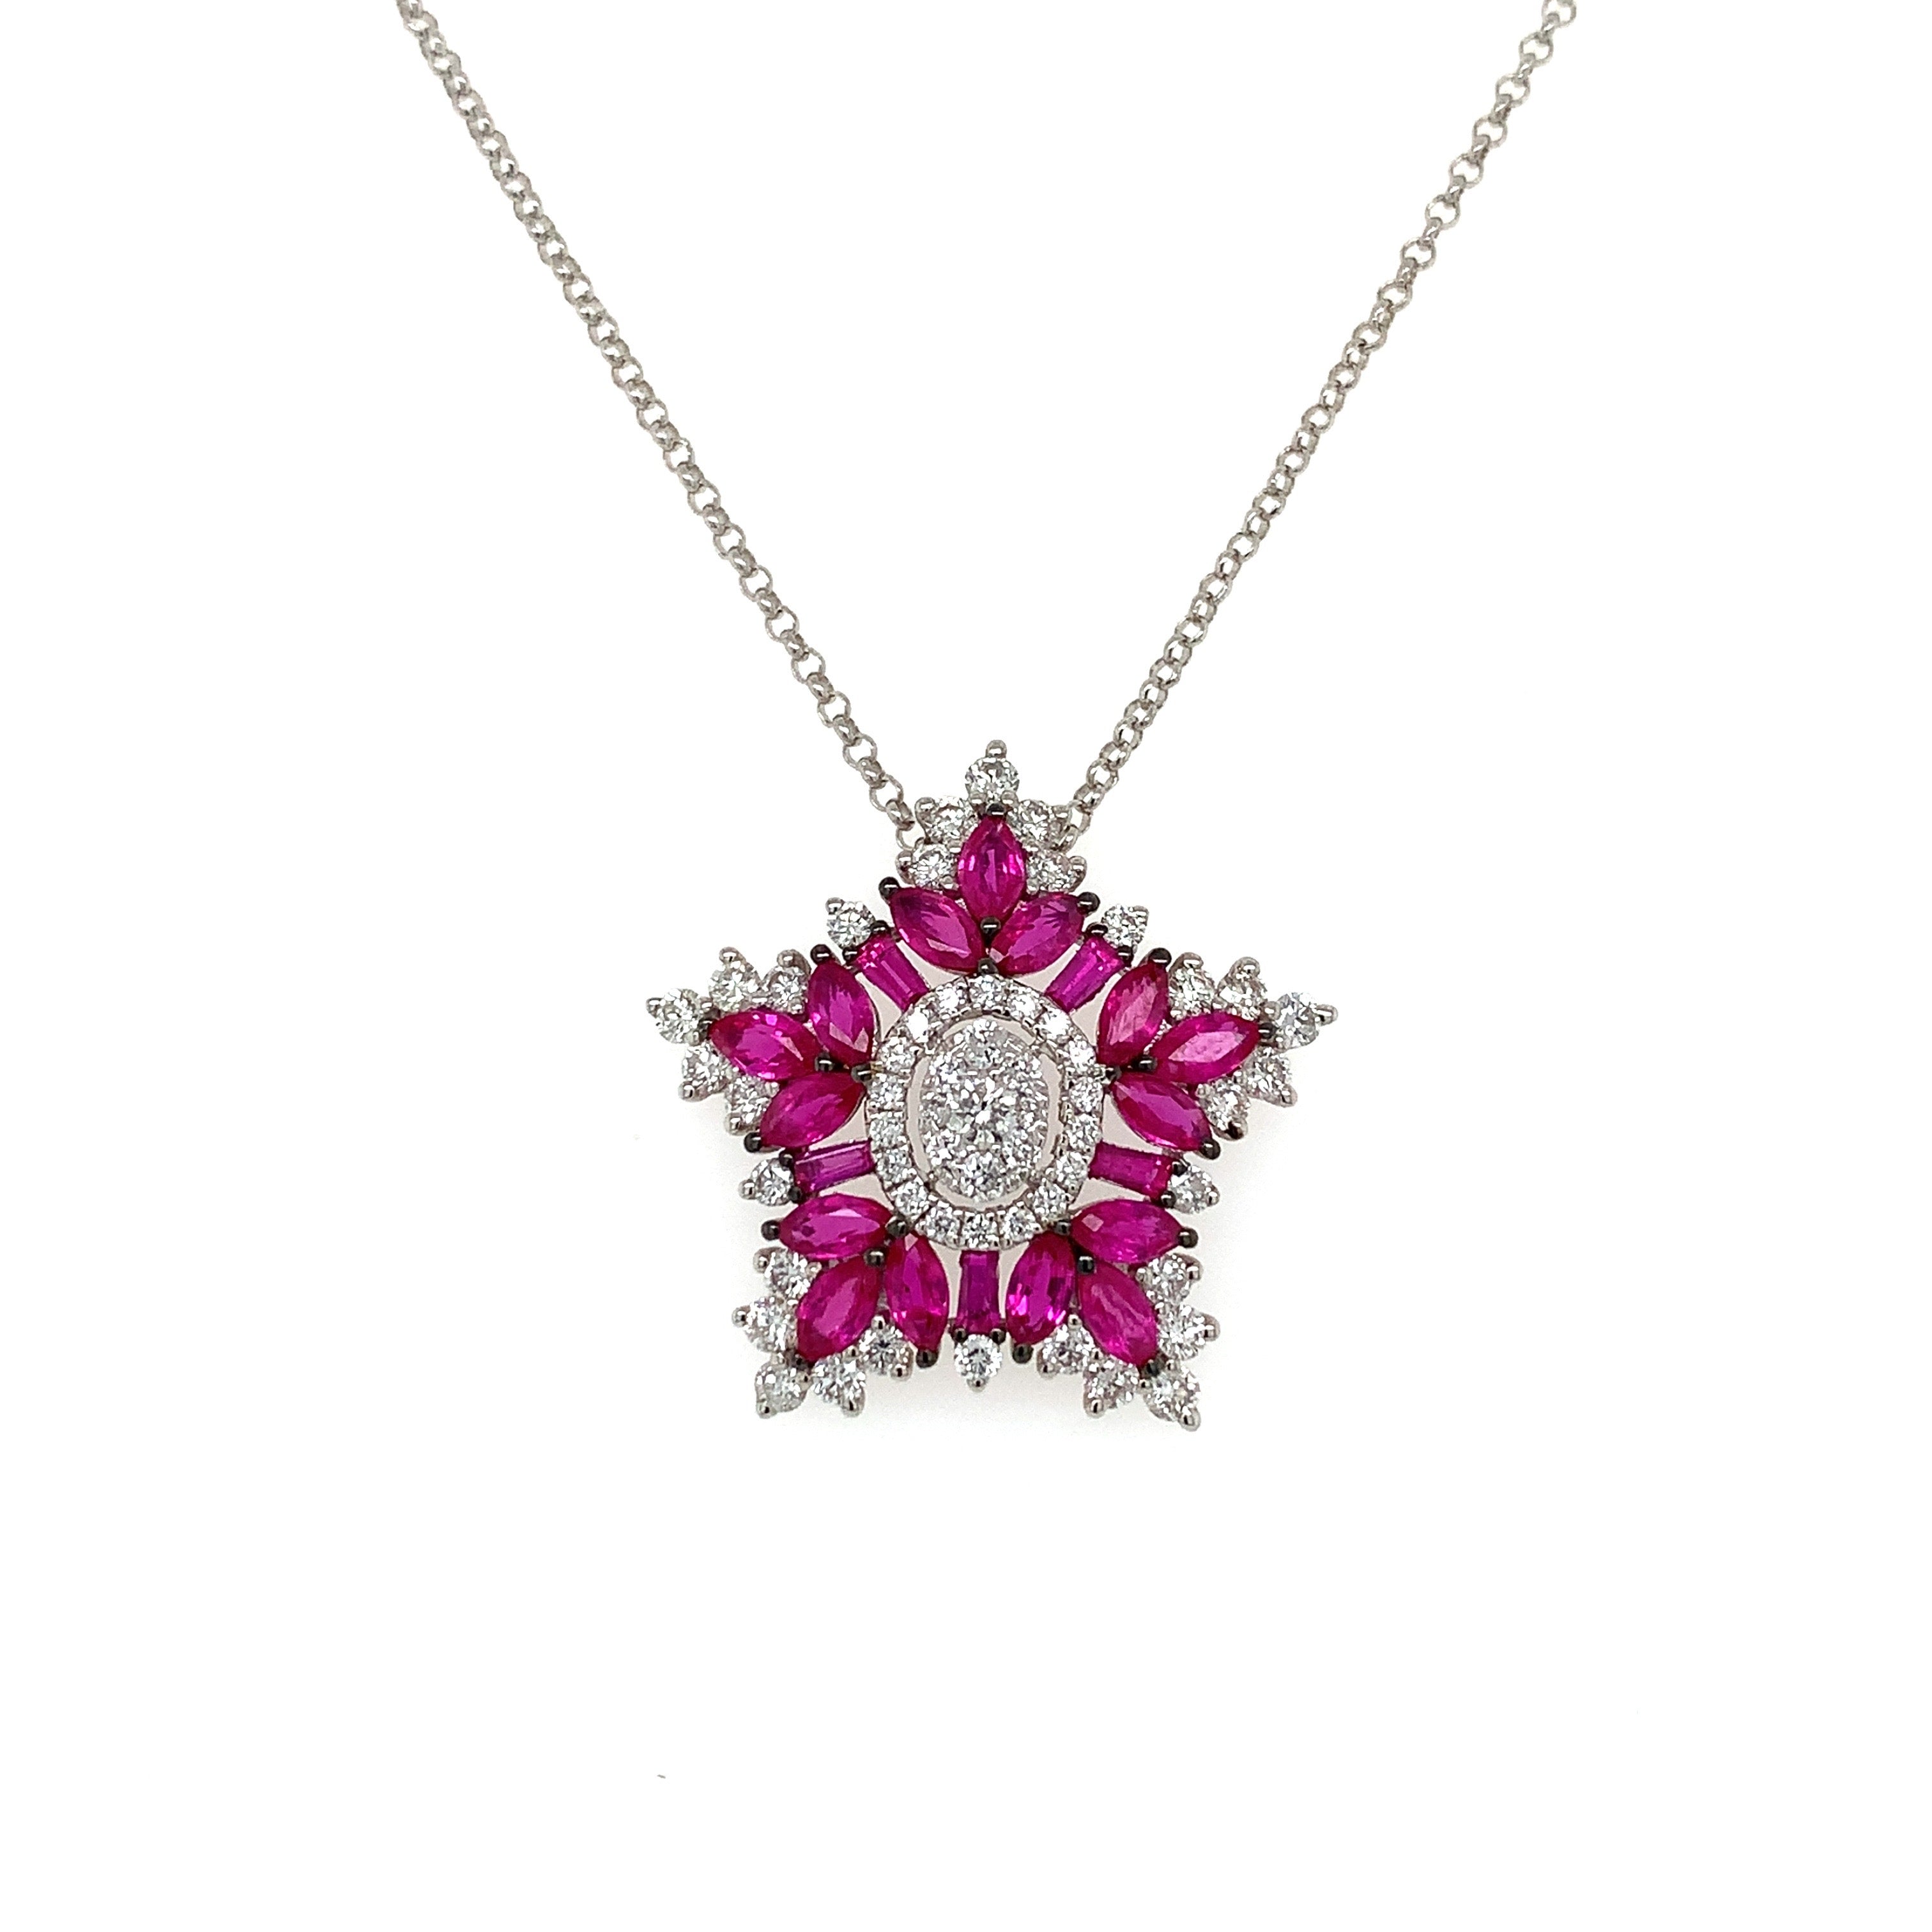 RUBY SNOWFLAKE NECKLACE